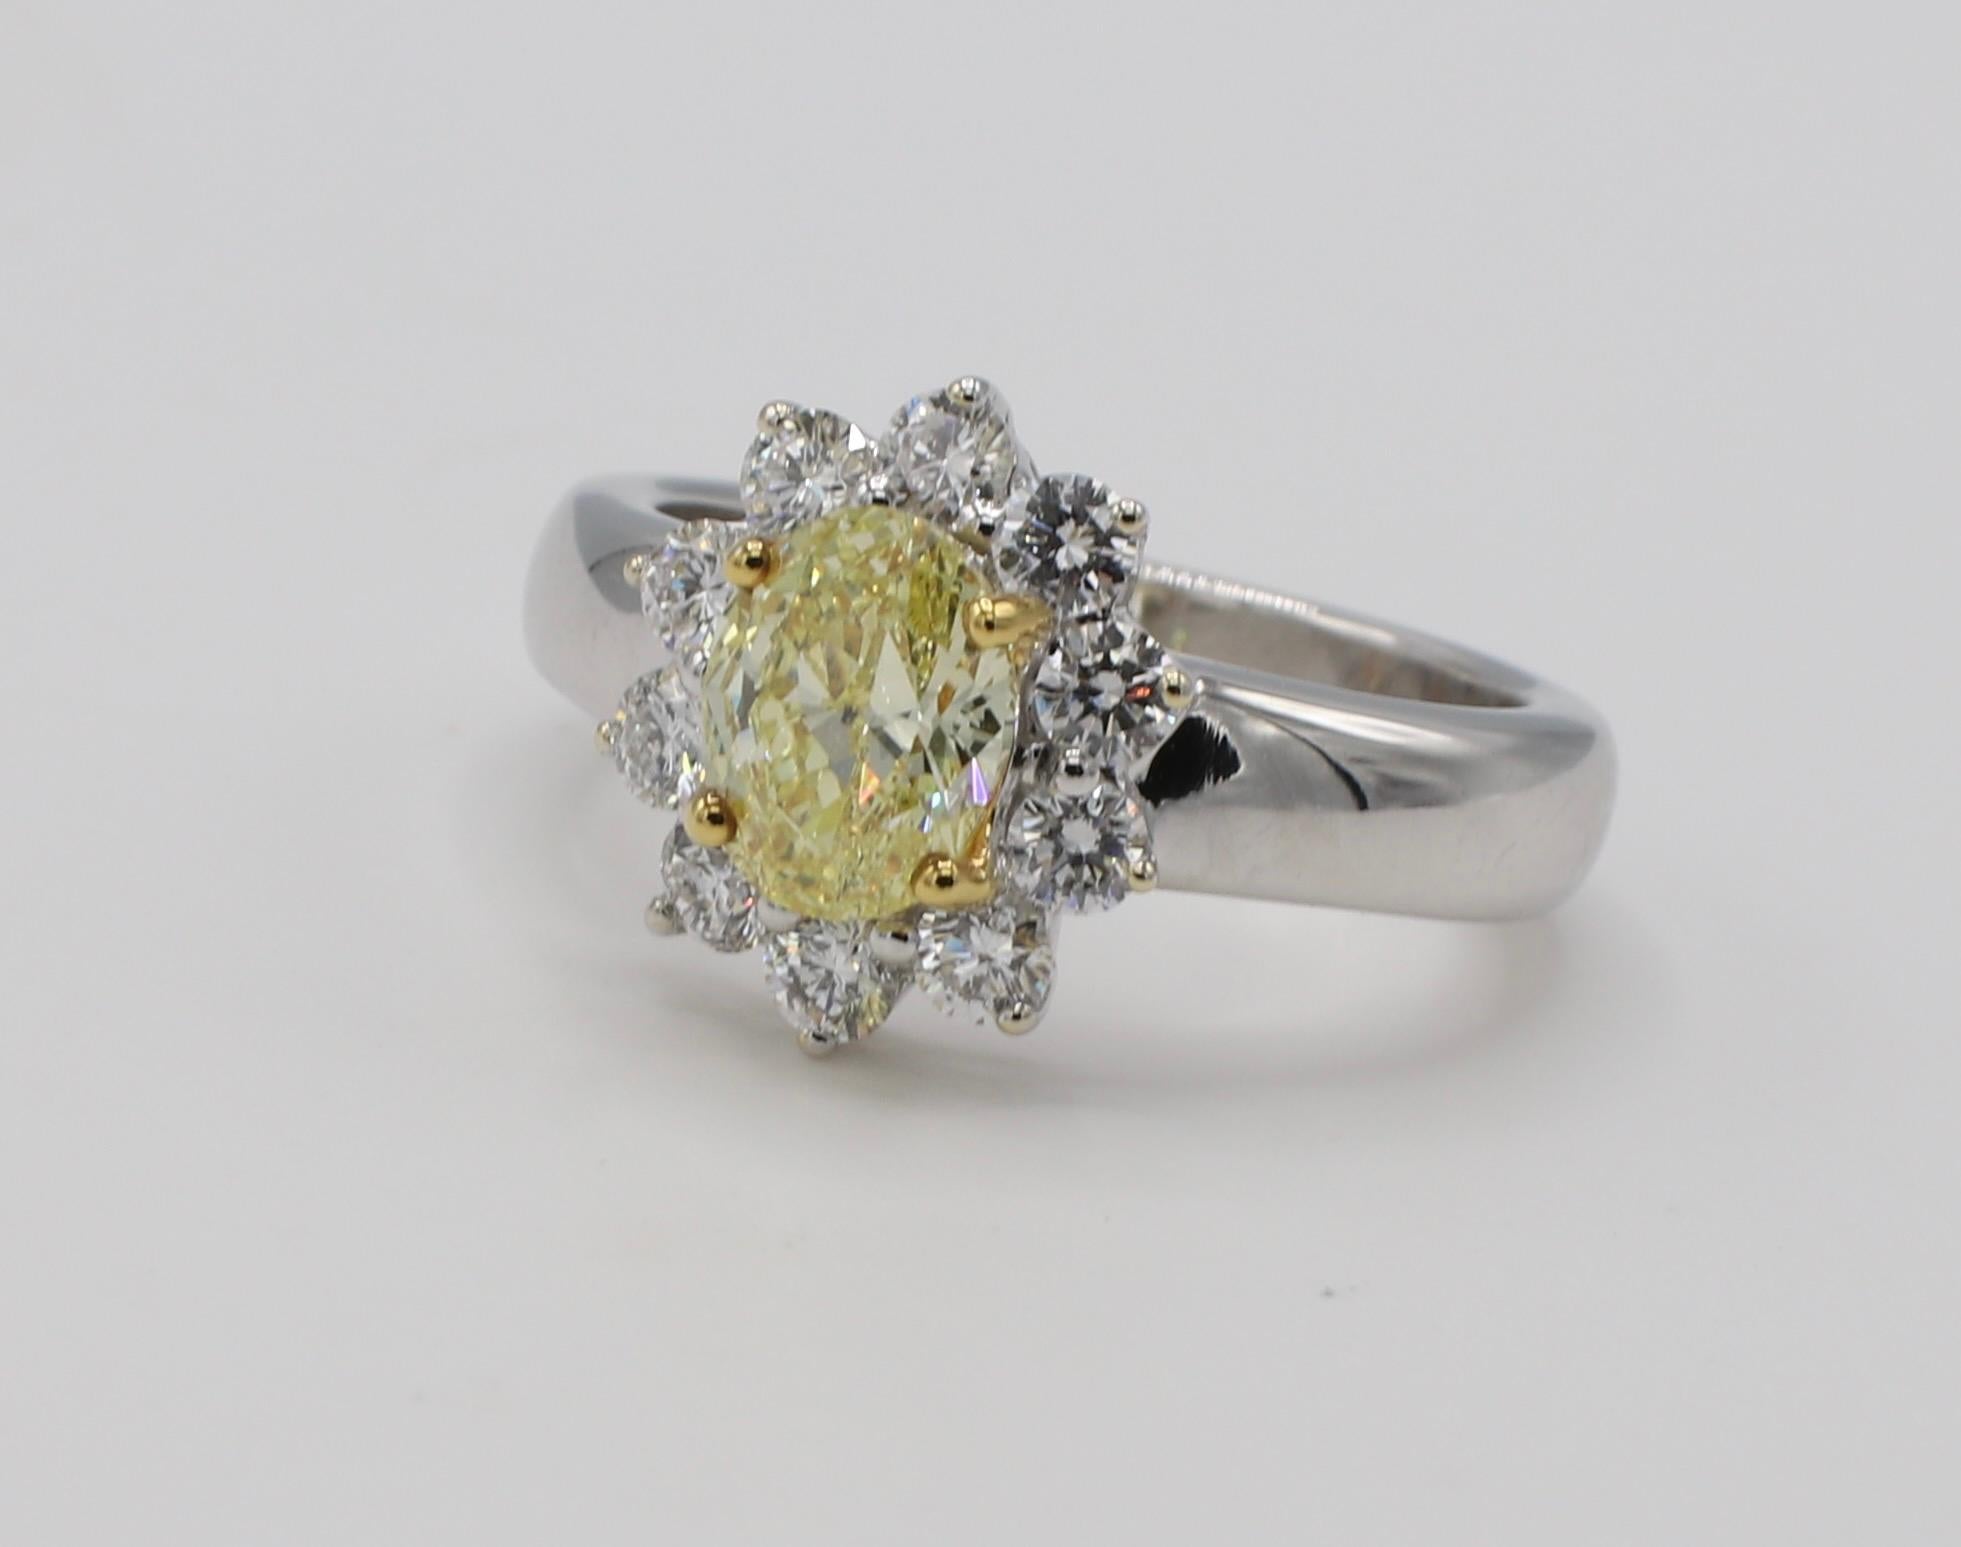 GIA Certified 1.04ct Natural Fancy Intense Yellow Oval Diamond Engagement Ring

GIA Report Number: 2201885401 (please note original certificate for details)
Center Stone: 1.04 carat Oval Modified Brilliant 
Color: Natural, Fancy Intense Yellow,